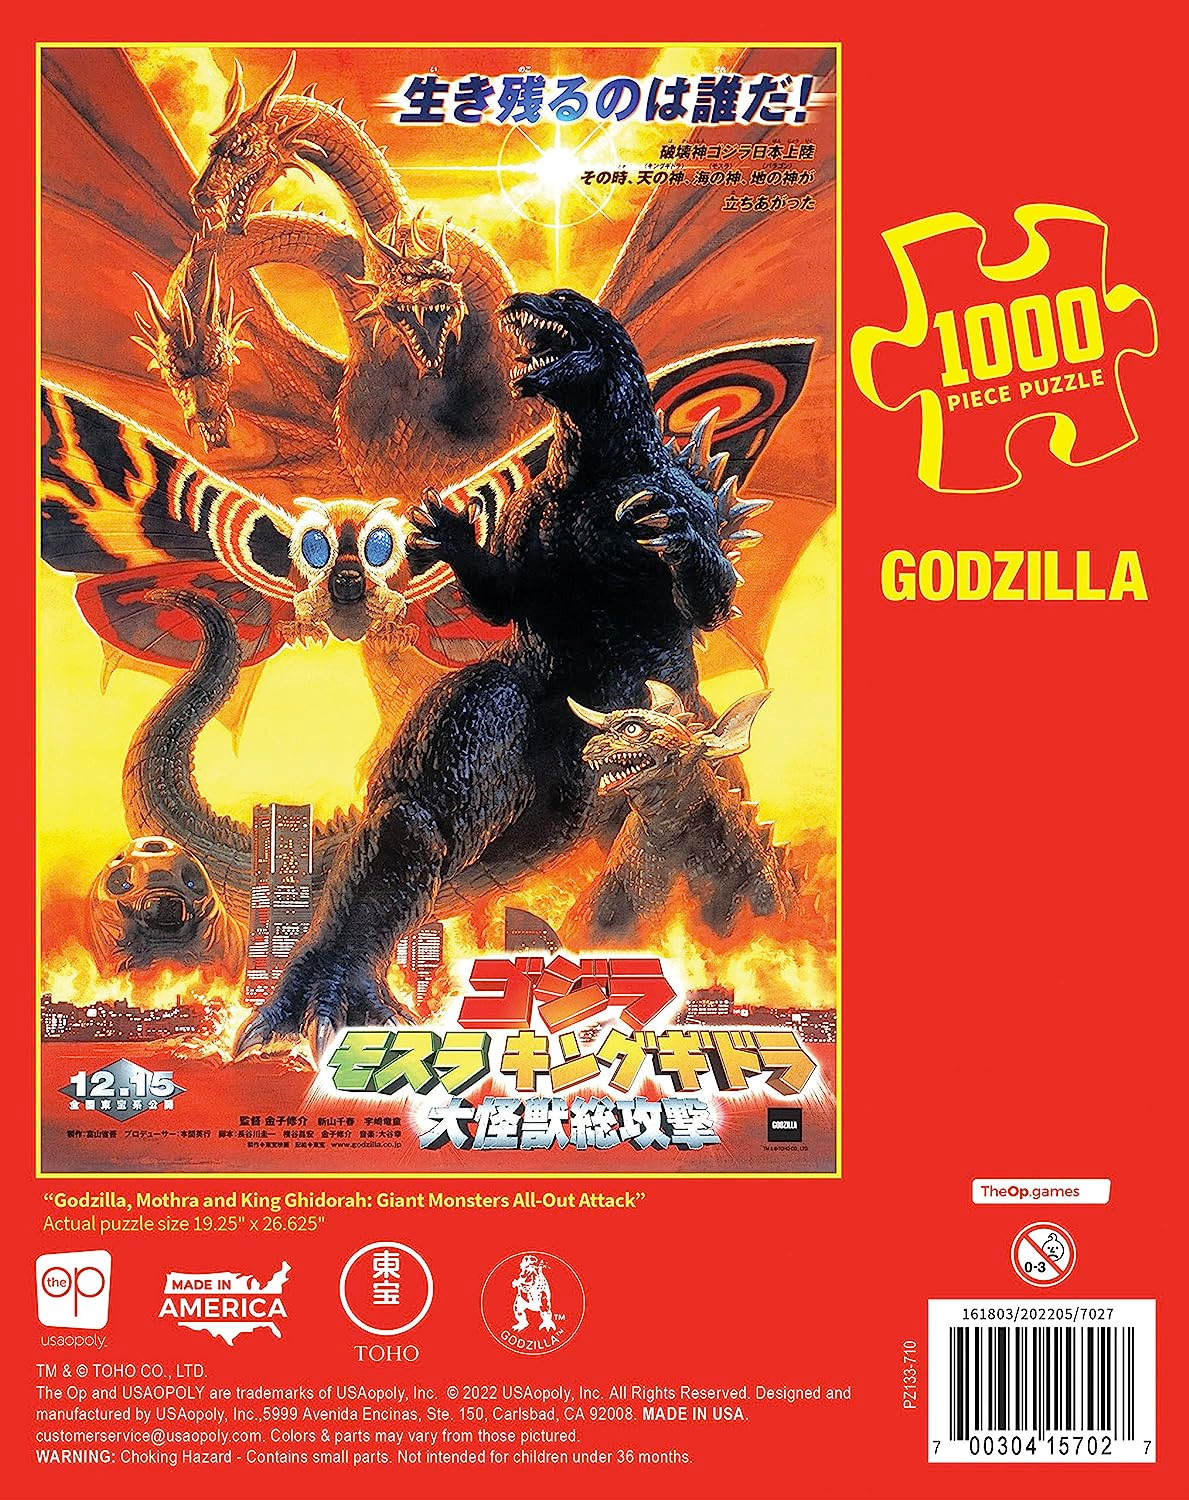 Quebra-Cabeça do Filme Godzilla, Mothra and King Ghidorah: Giant Monsters All-Out Attack